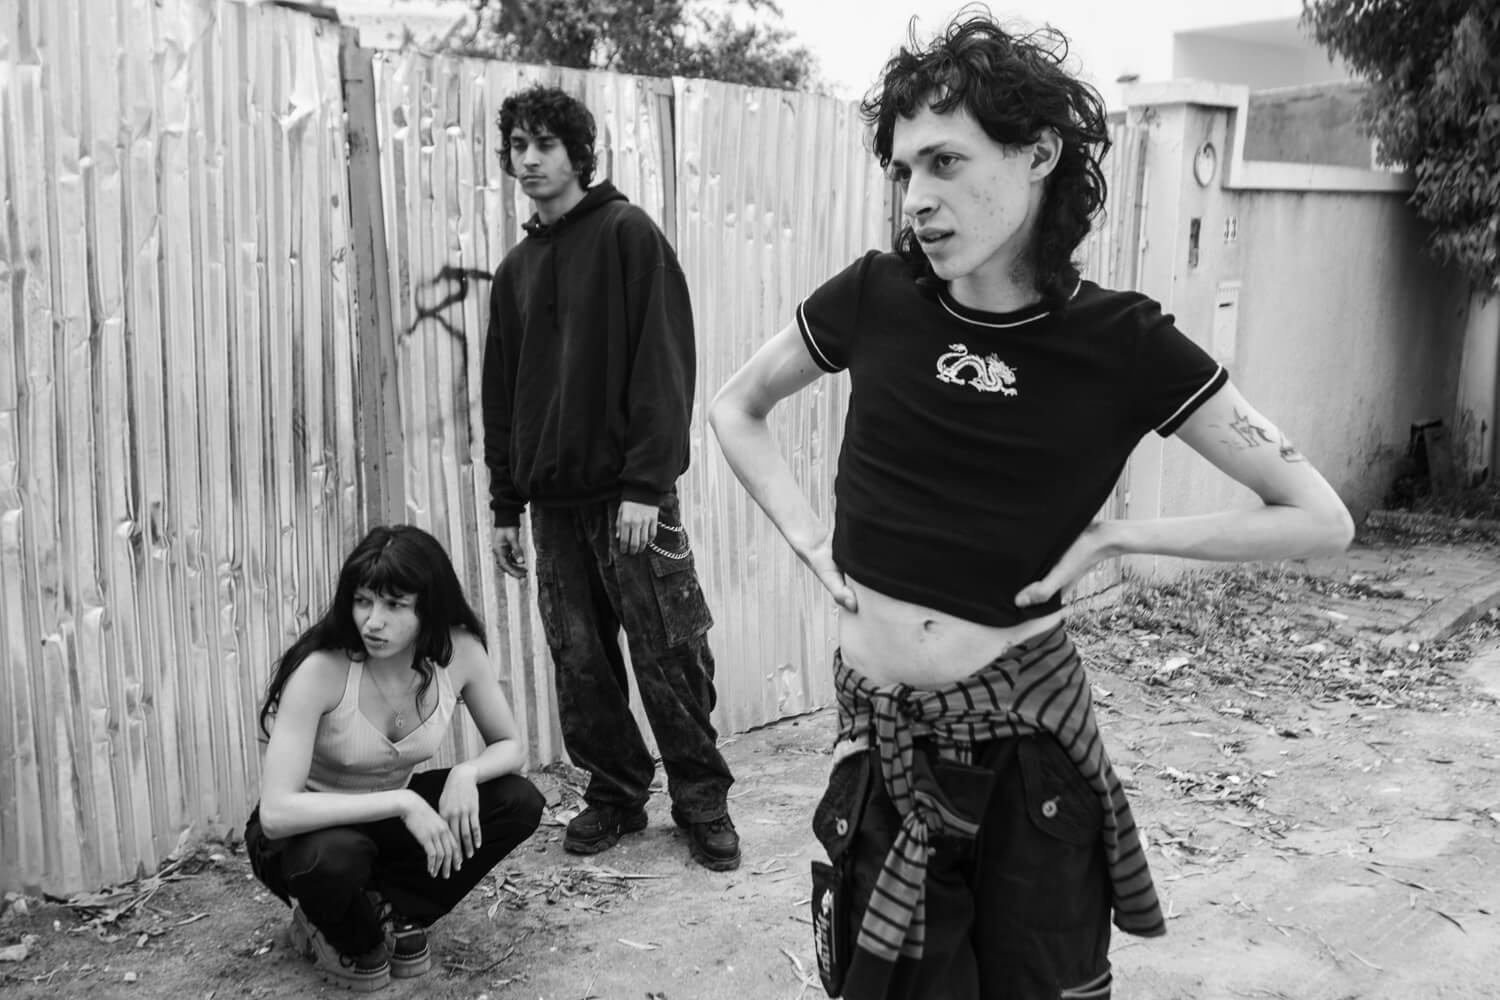 Three young people in a suburban setting display distinct punk-influenced fashion, with an air of nonconformity and casual defiance.